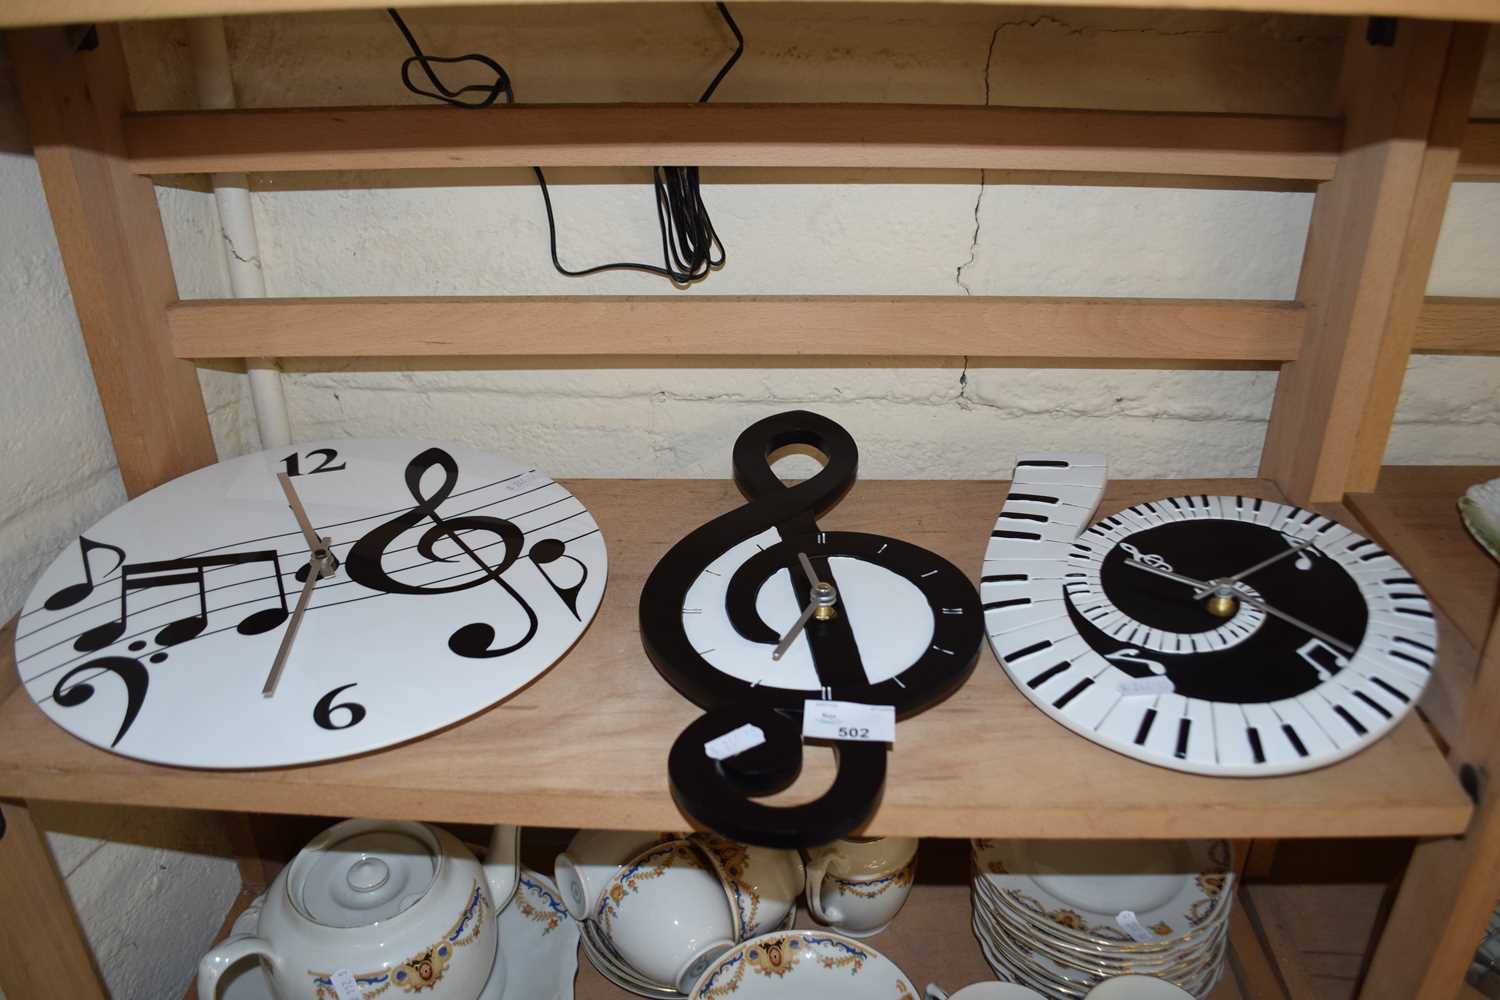 Three modern battery wall clocks decorated with musical notes